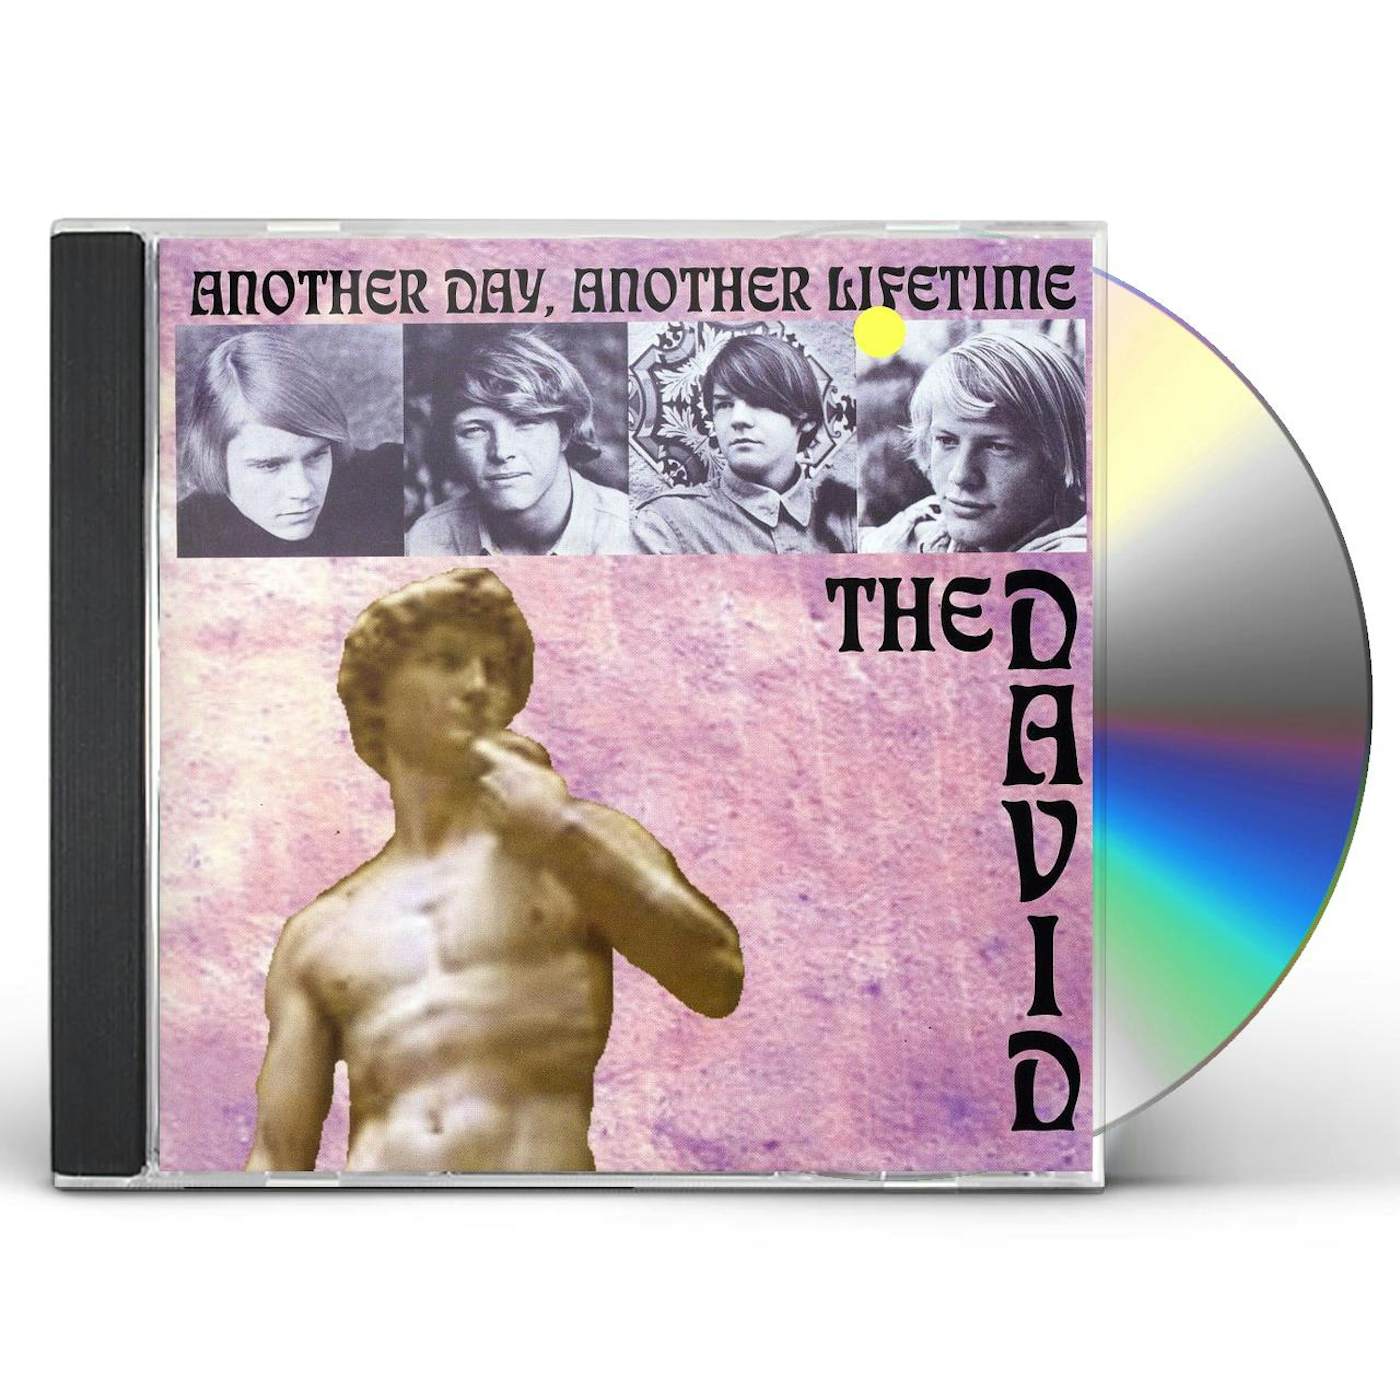 David ANOTHER DAY ANOTHER LIFETIME CD